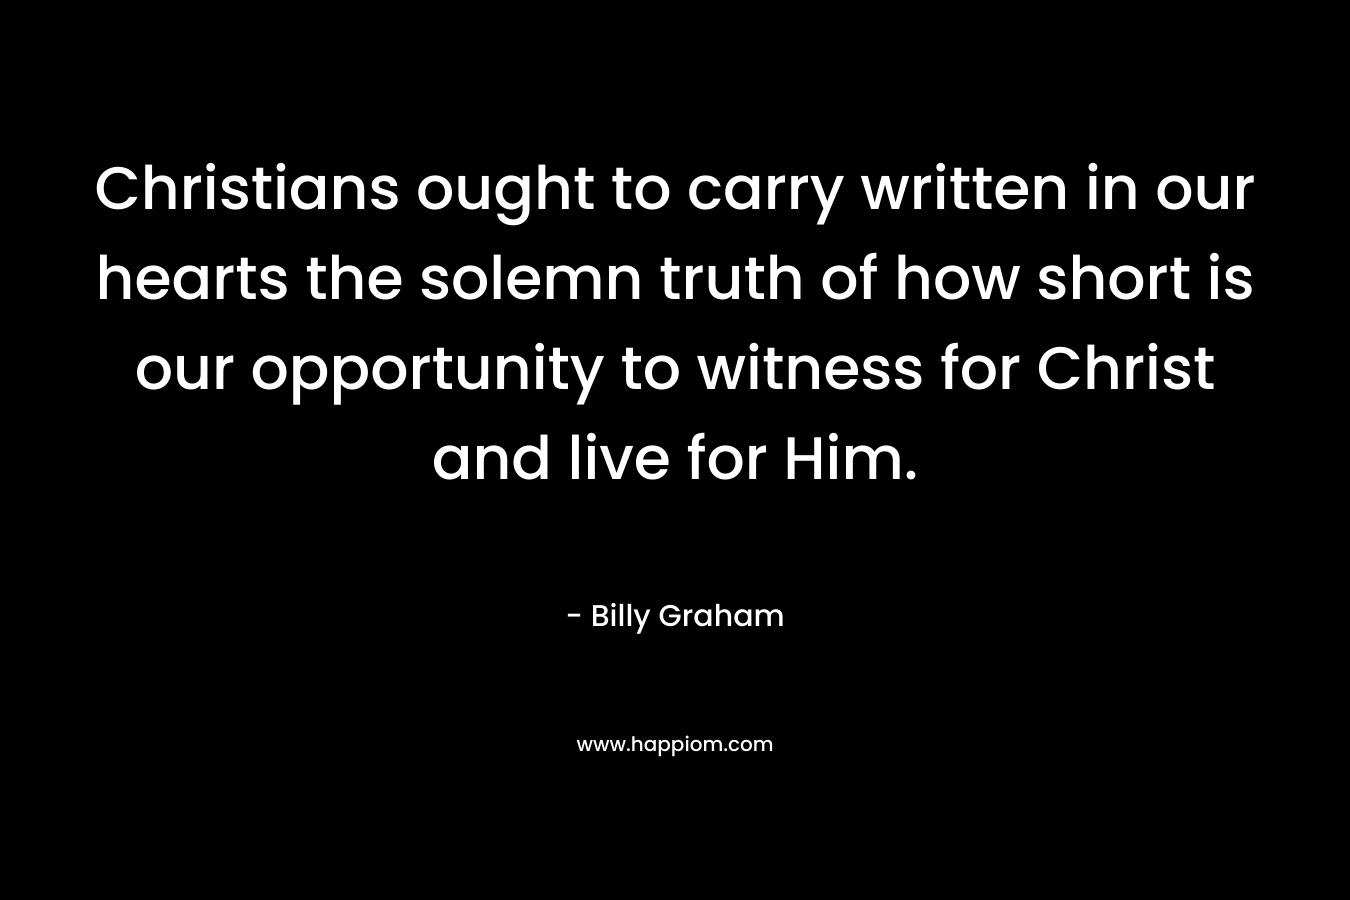 Christians ought to carry written in our hearts the solemn truth of how short is our opportunity to witness for Christ and live for Him.